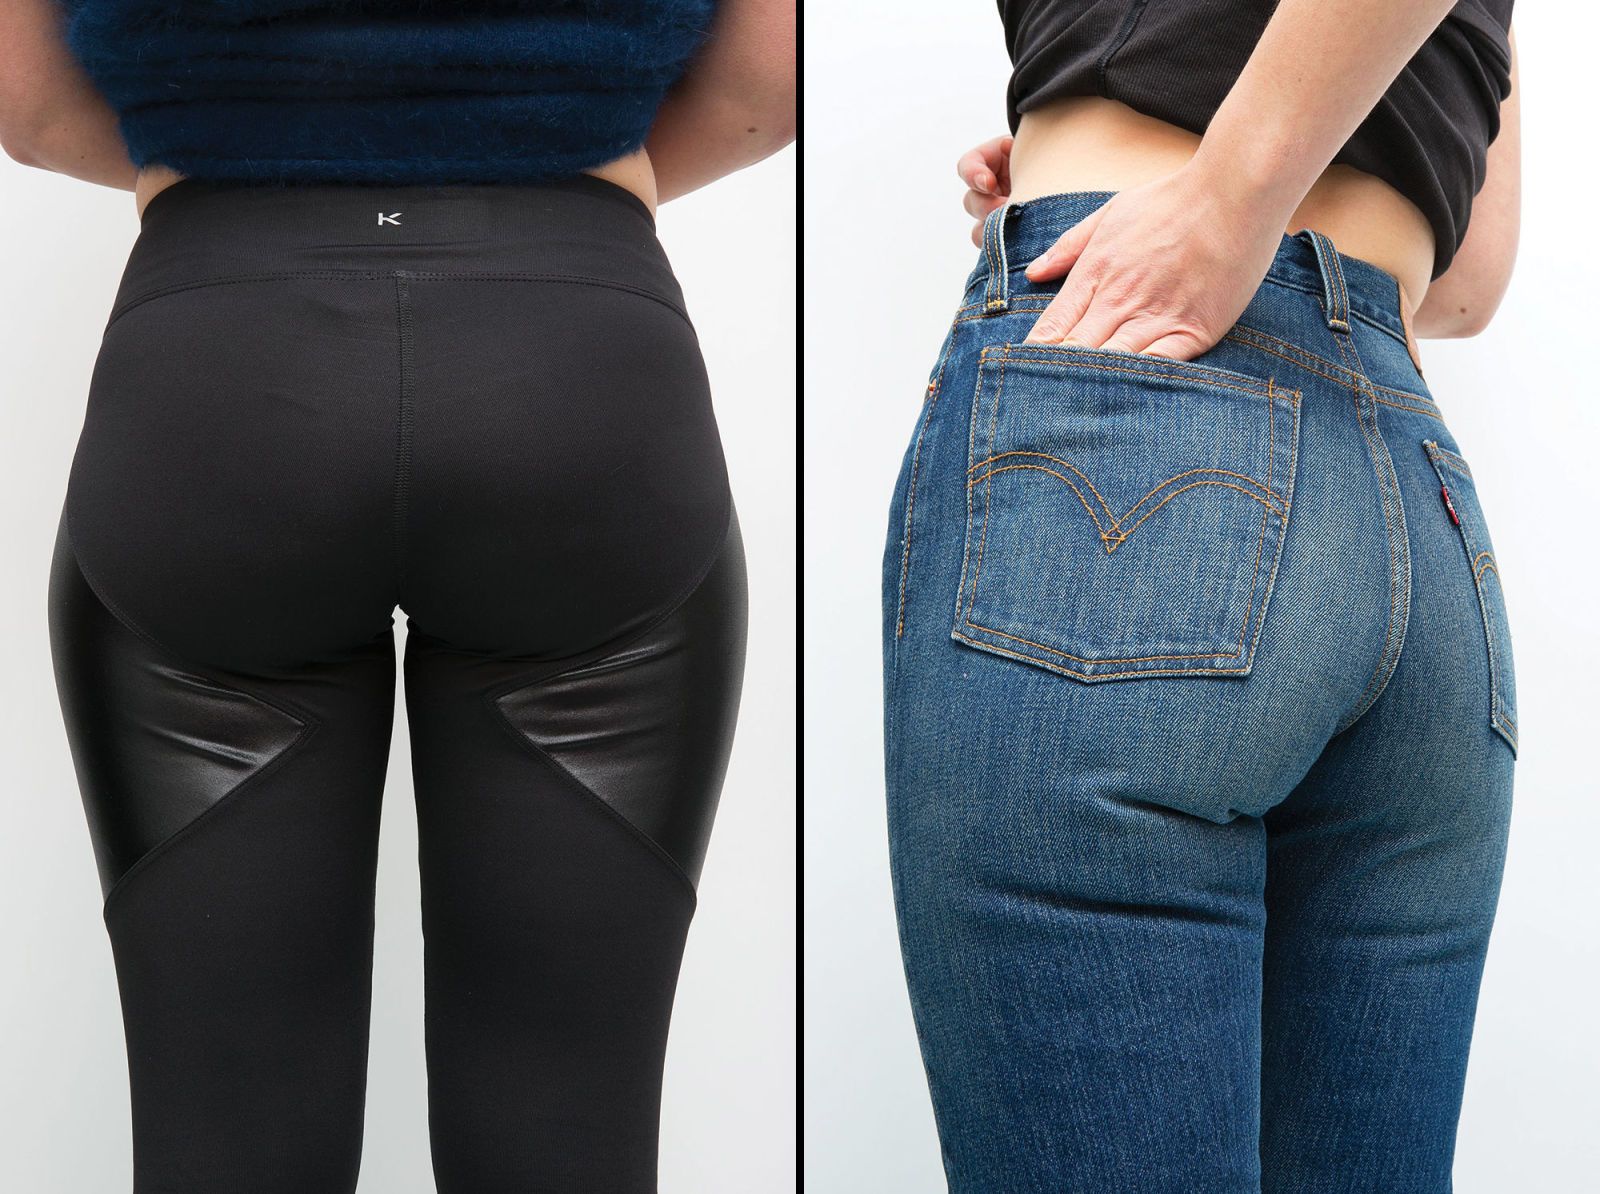 10 People Tried Wedgie Jeans and They 